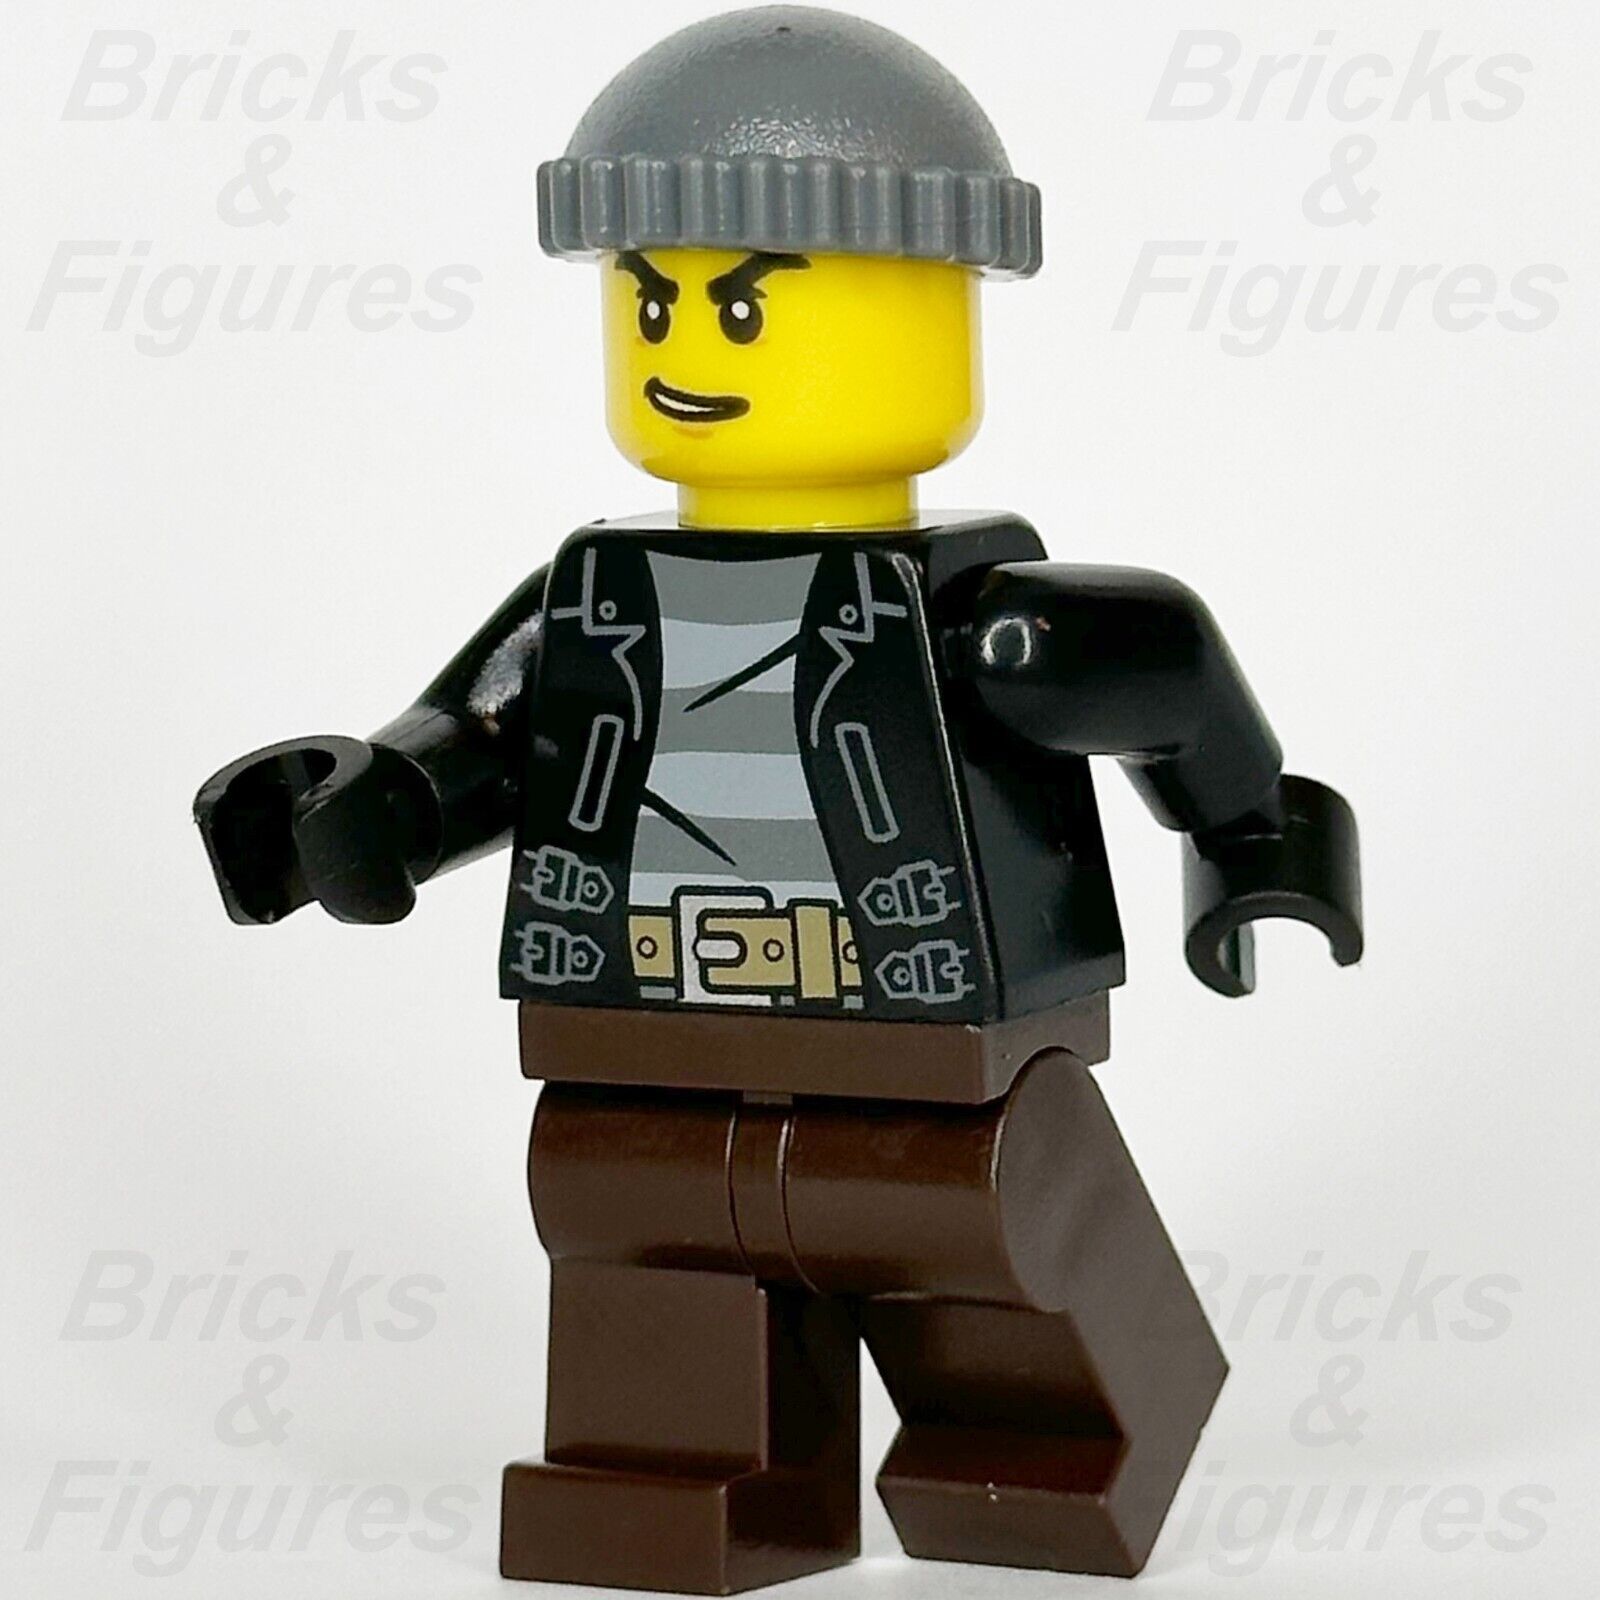 LEGO City Bandit Crook Minifigure Police Town Minifig Male Beanie 60245 cty1133 - Bricks & Figures